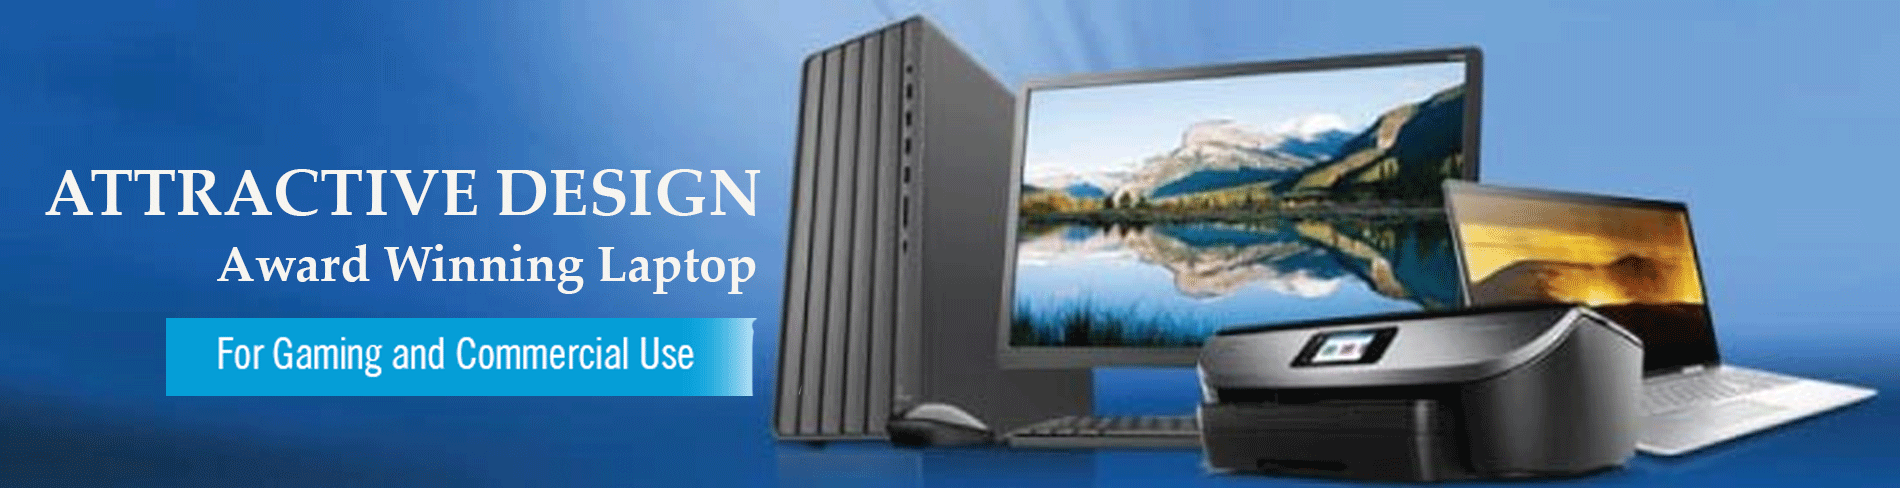 hp laptop store in chennai and hyderabad